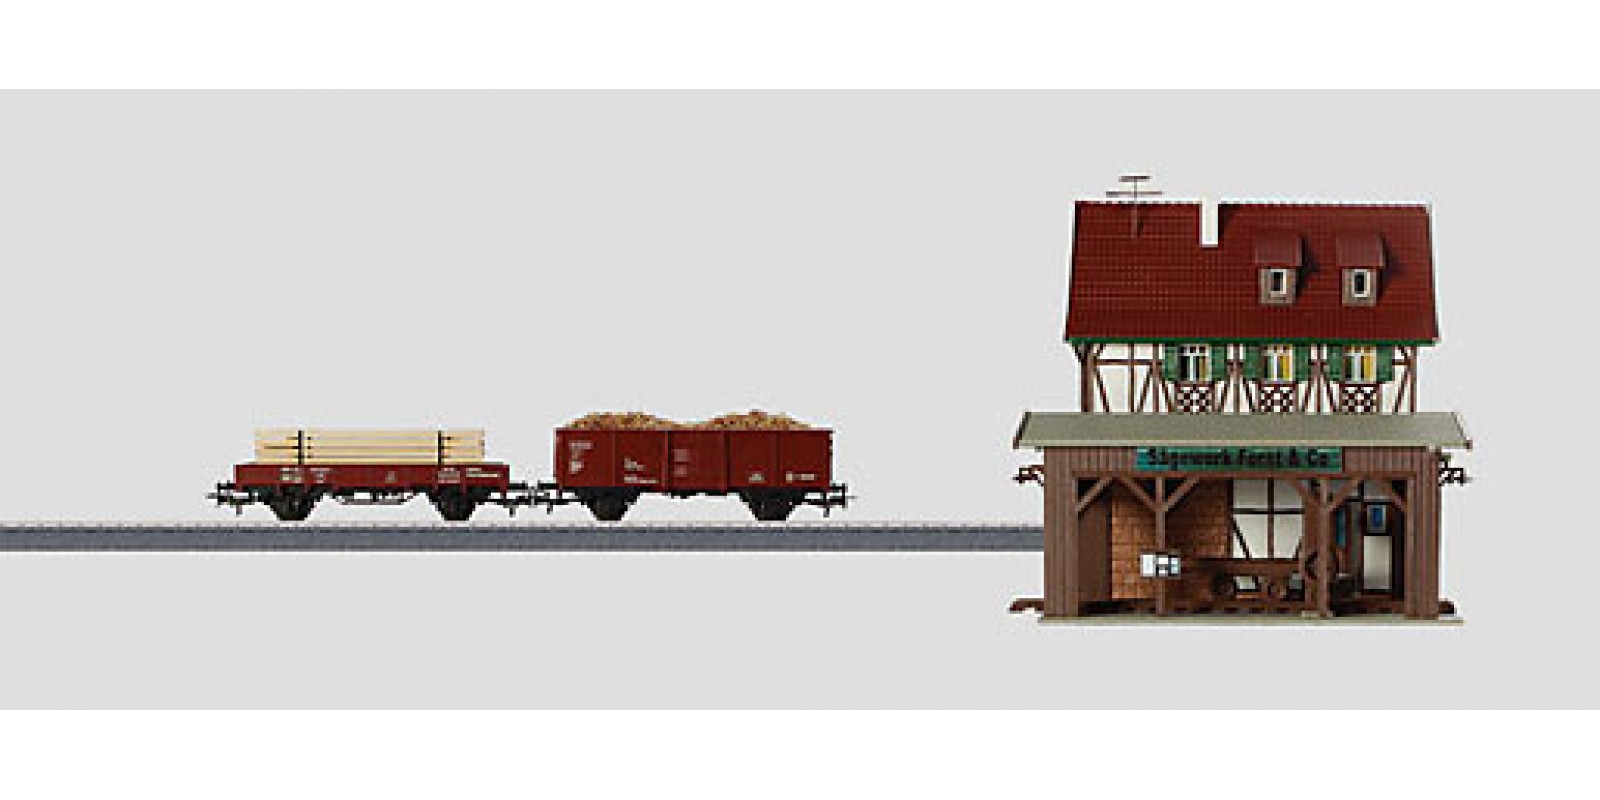 78310 "Forestry" Theme Extension Set.